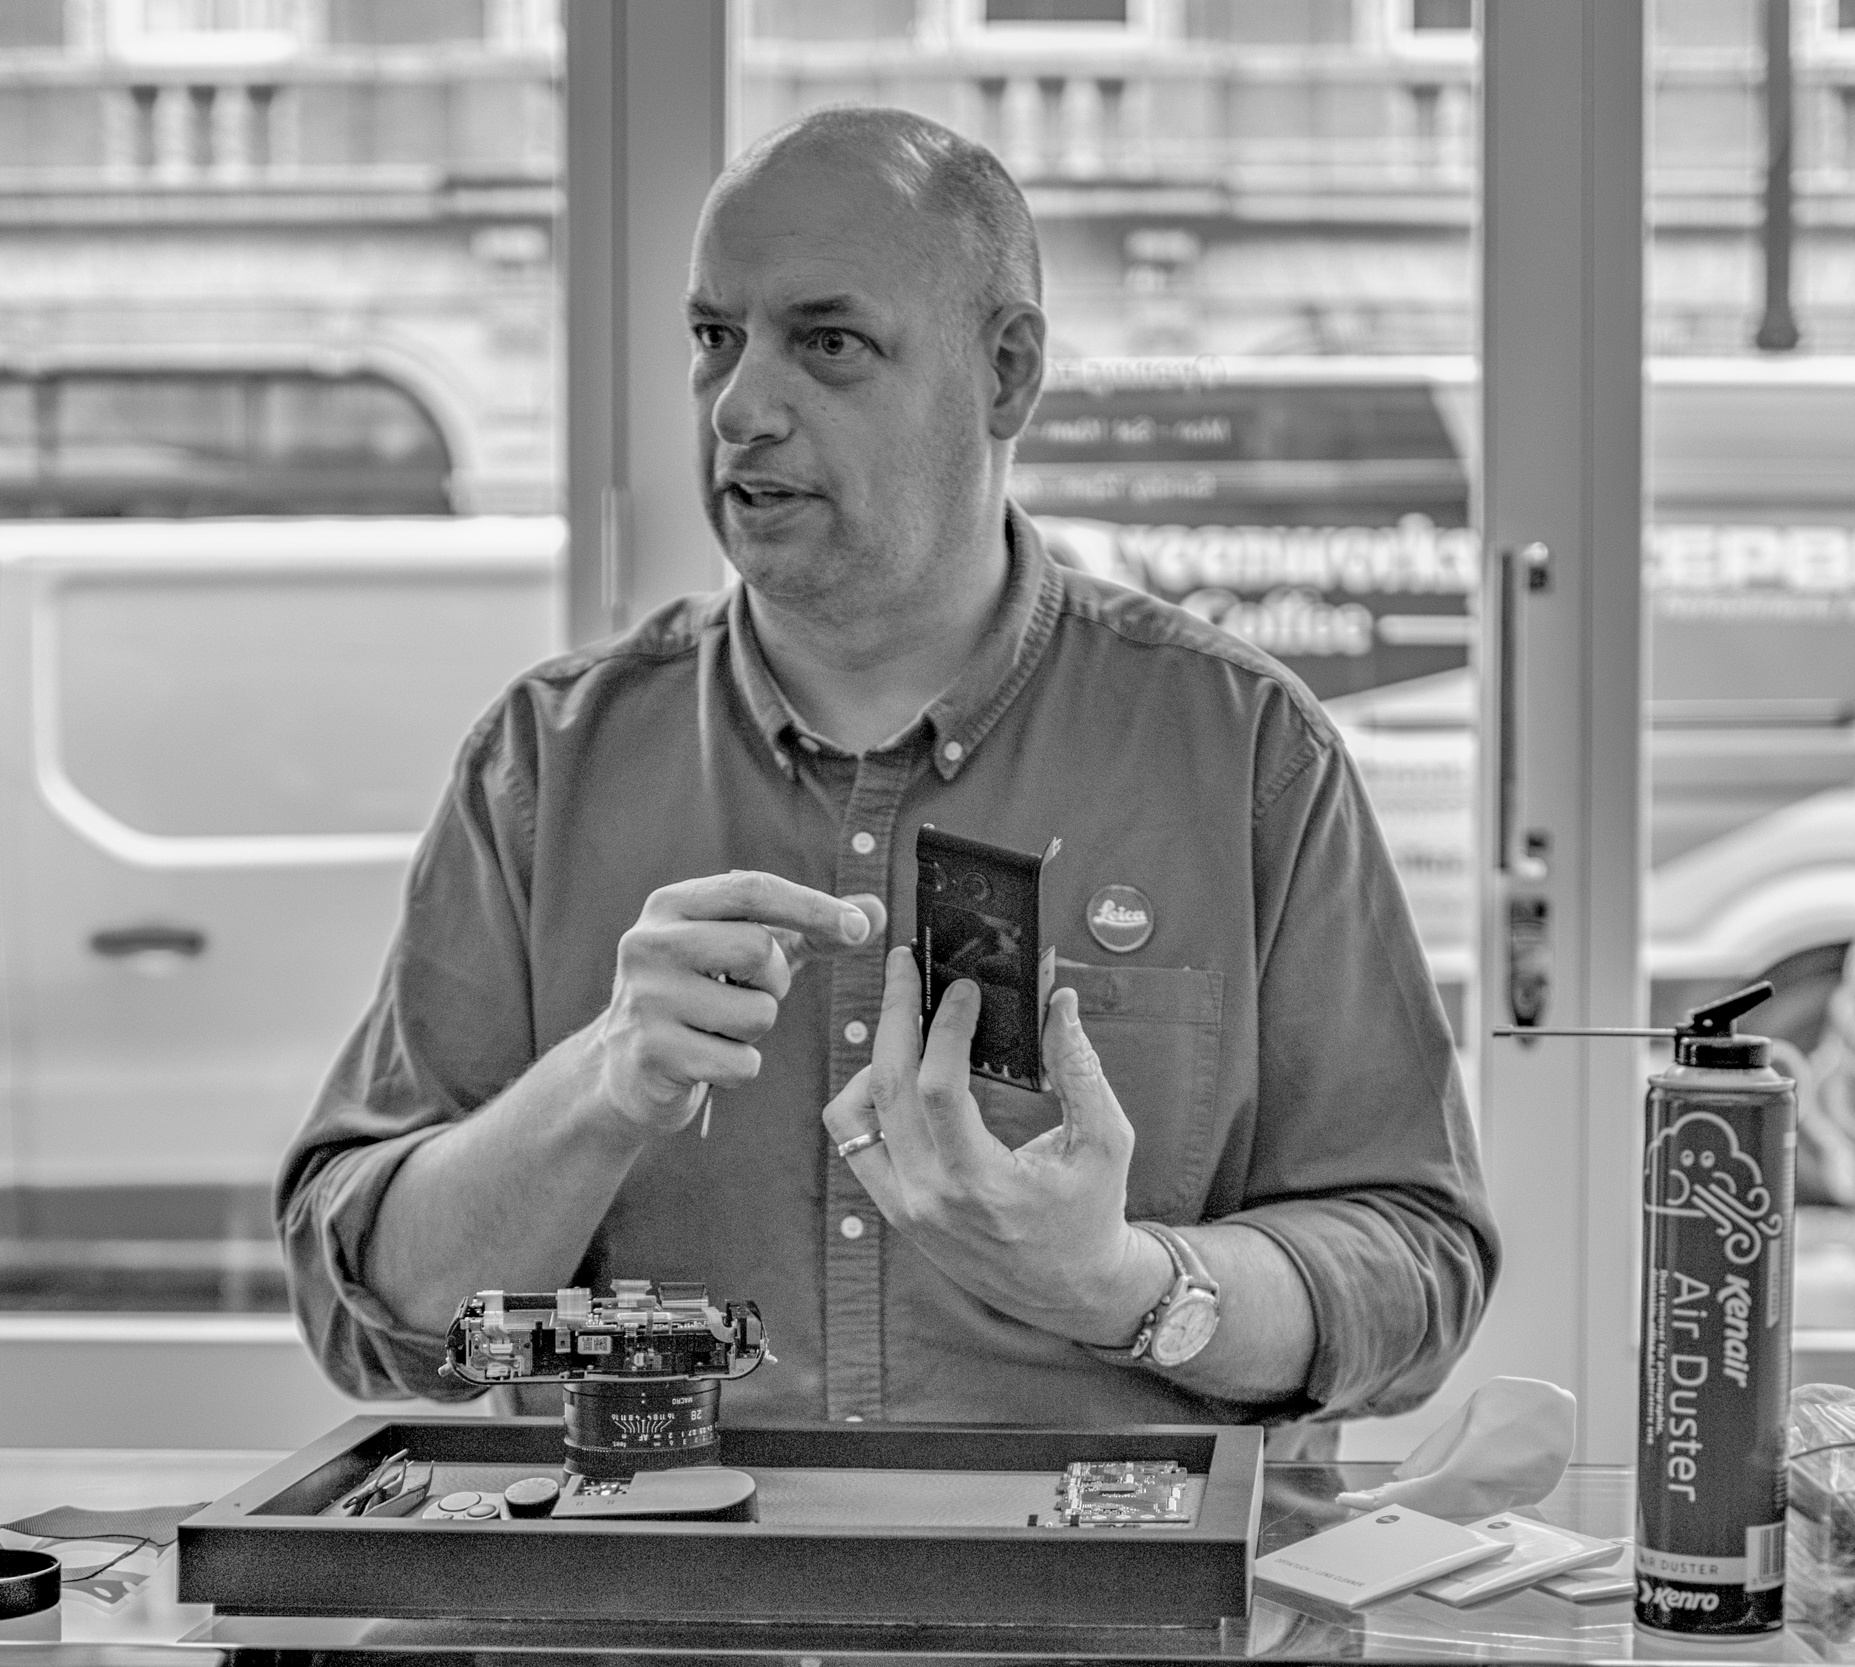 David Slater demonstrating how to strip down a Leica Q at a Leica Society gathering in Mayfair in October 2019